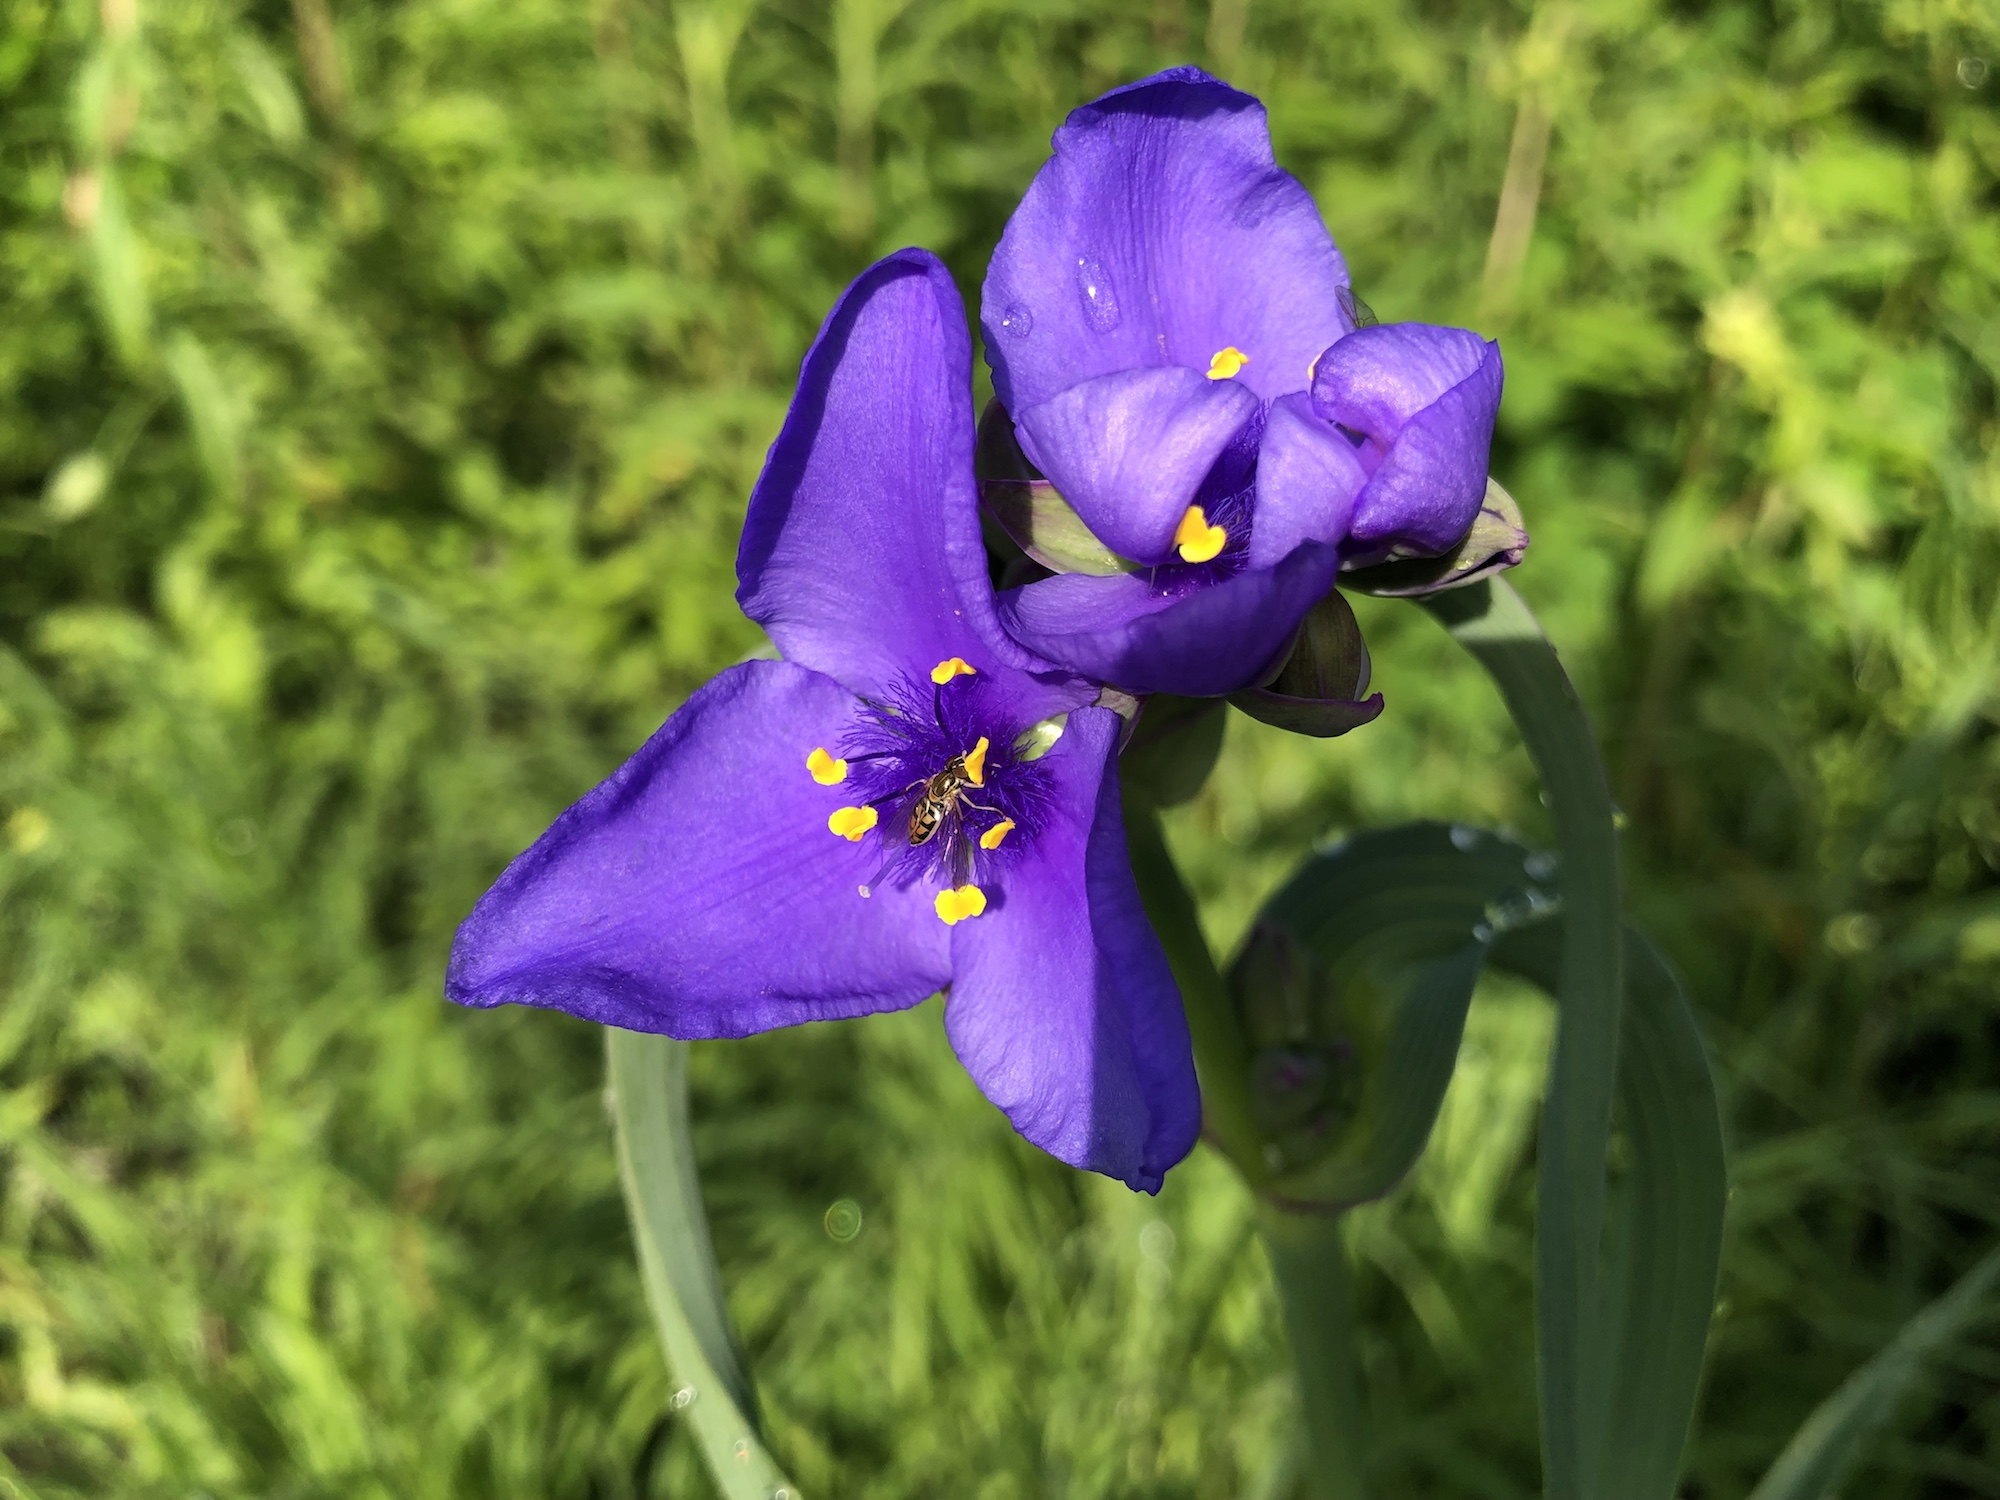 Spiderwort on the banks of the retaining pond on corner of Nakoma Road and Manitou Way on June 5, 2019.